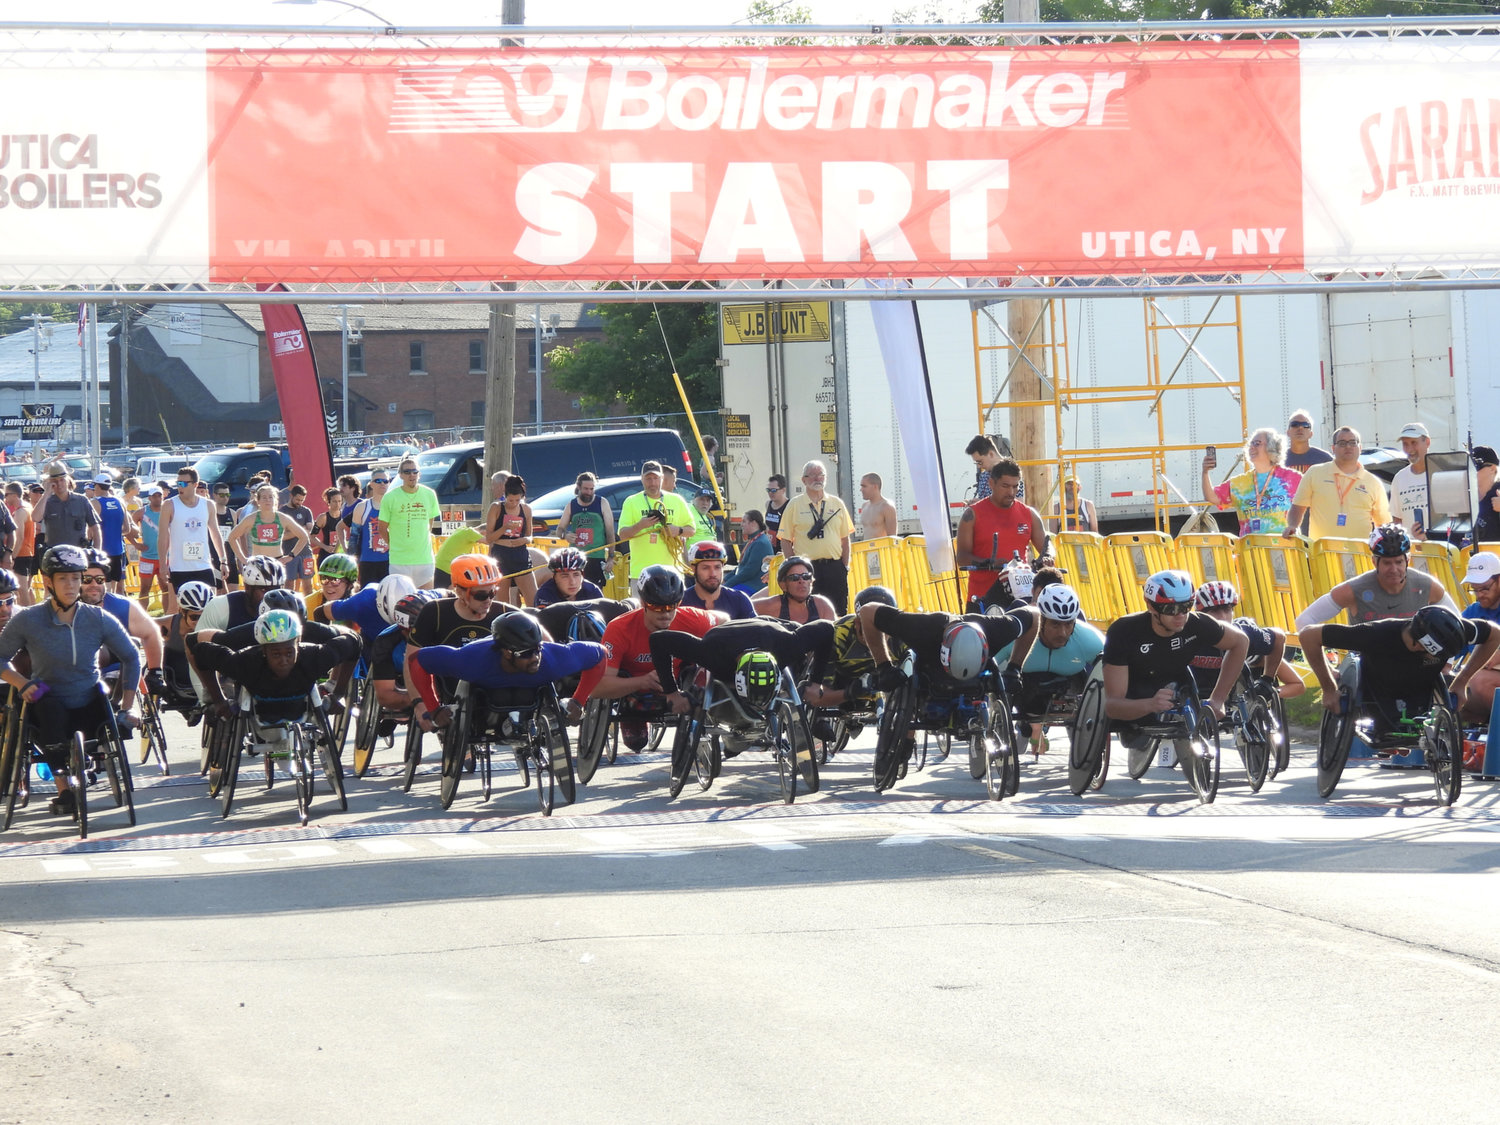 Wheelchair racers take their place for the 45th Boilermaker Road Race on Sunday in Utica.